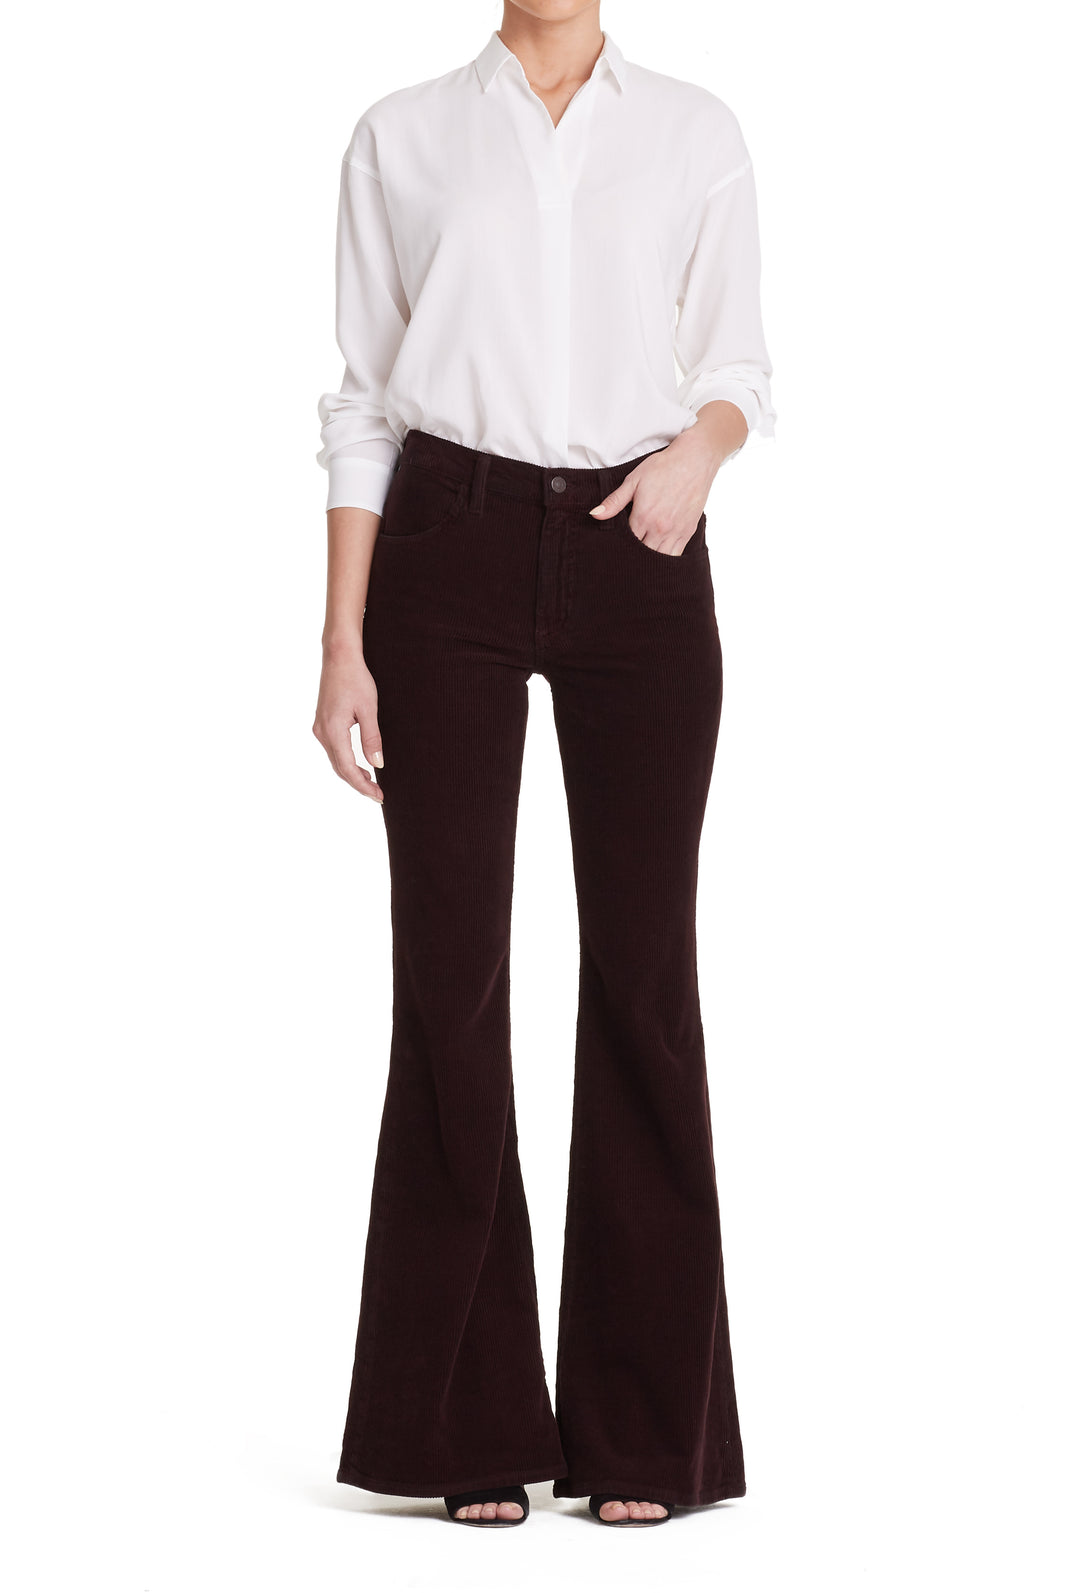 Citizens of Humanity - Chloe Mid Rise Super Flare Jeans in Raisin Wash